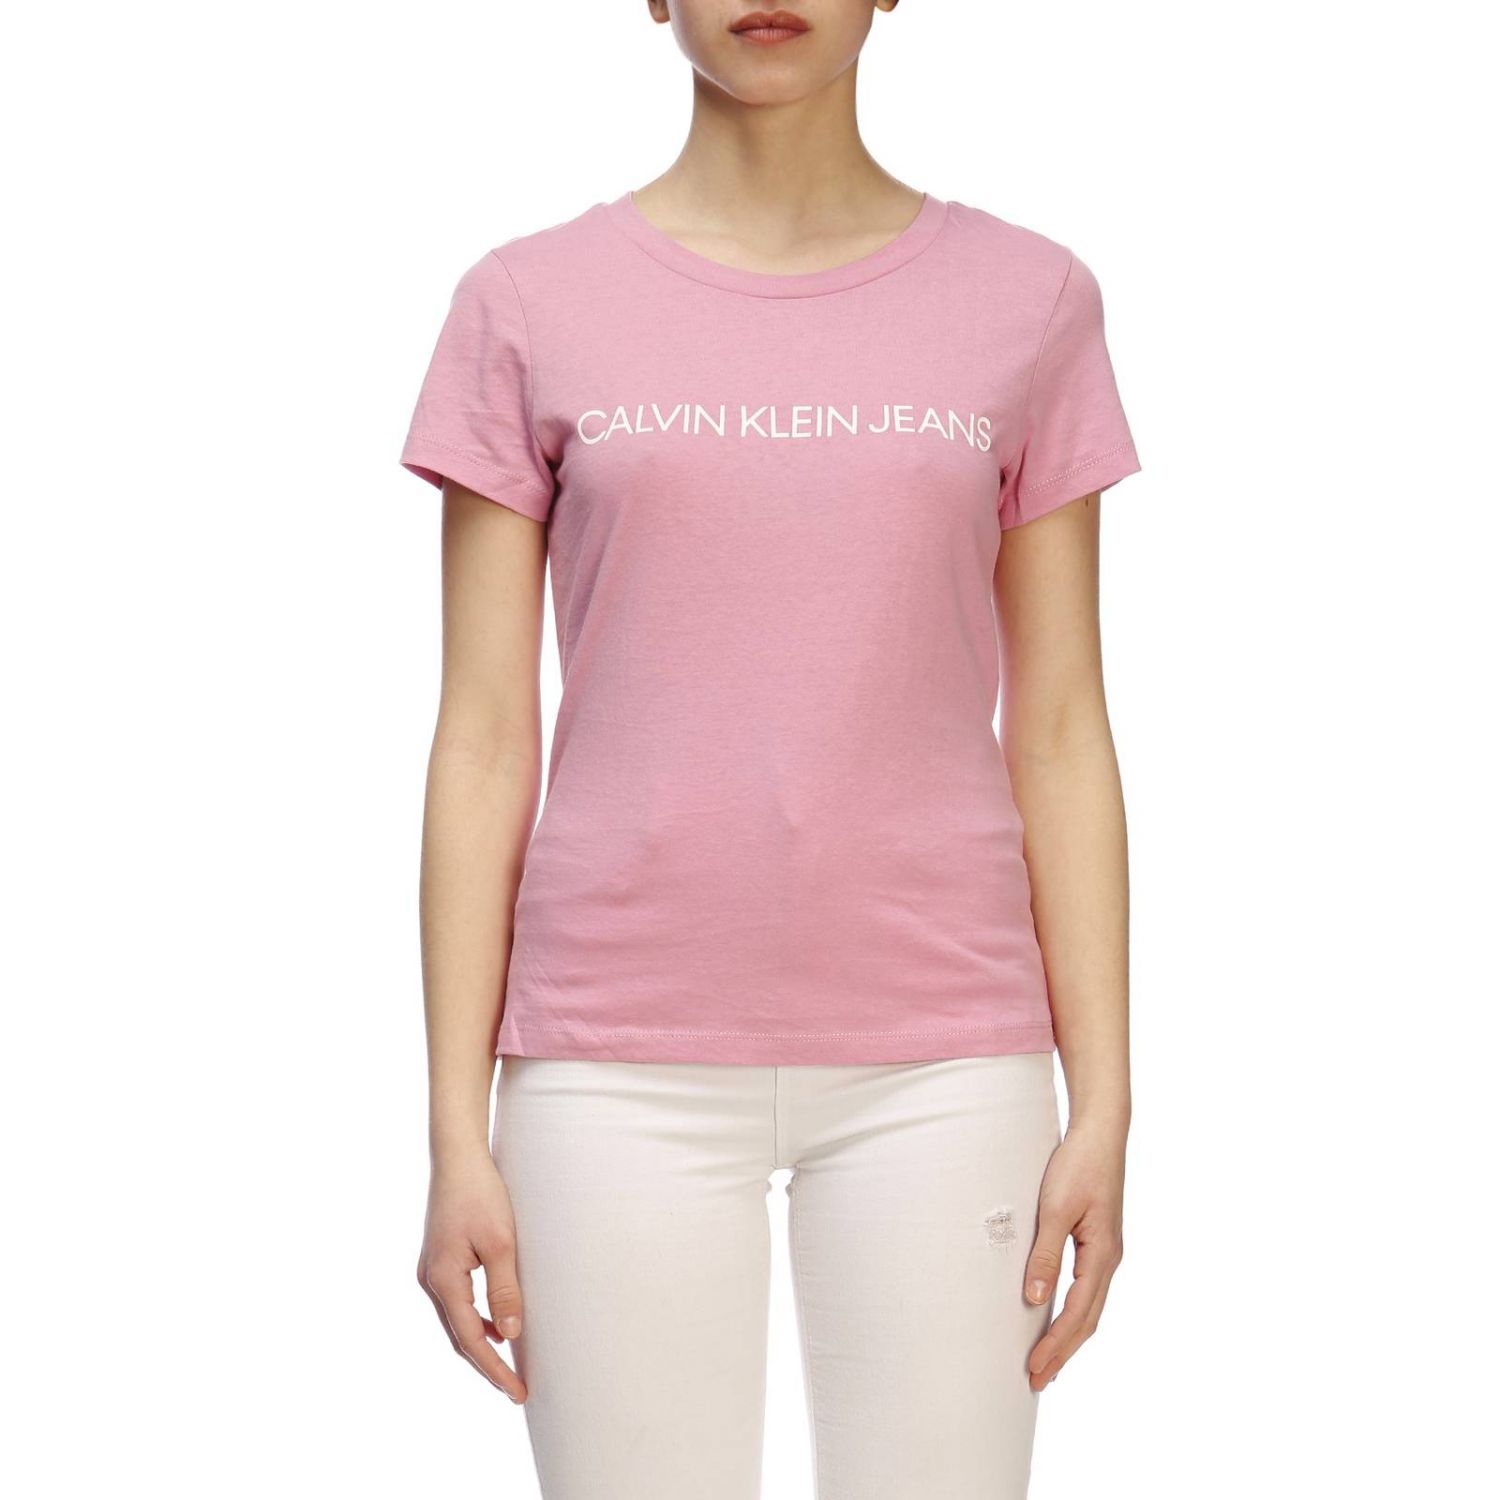 Calvin Klein Jeans Outlet: t-shirt for woman - Pink | Calvin Klein ...